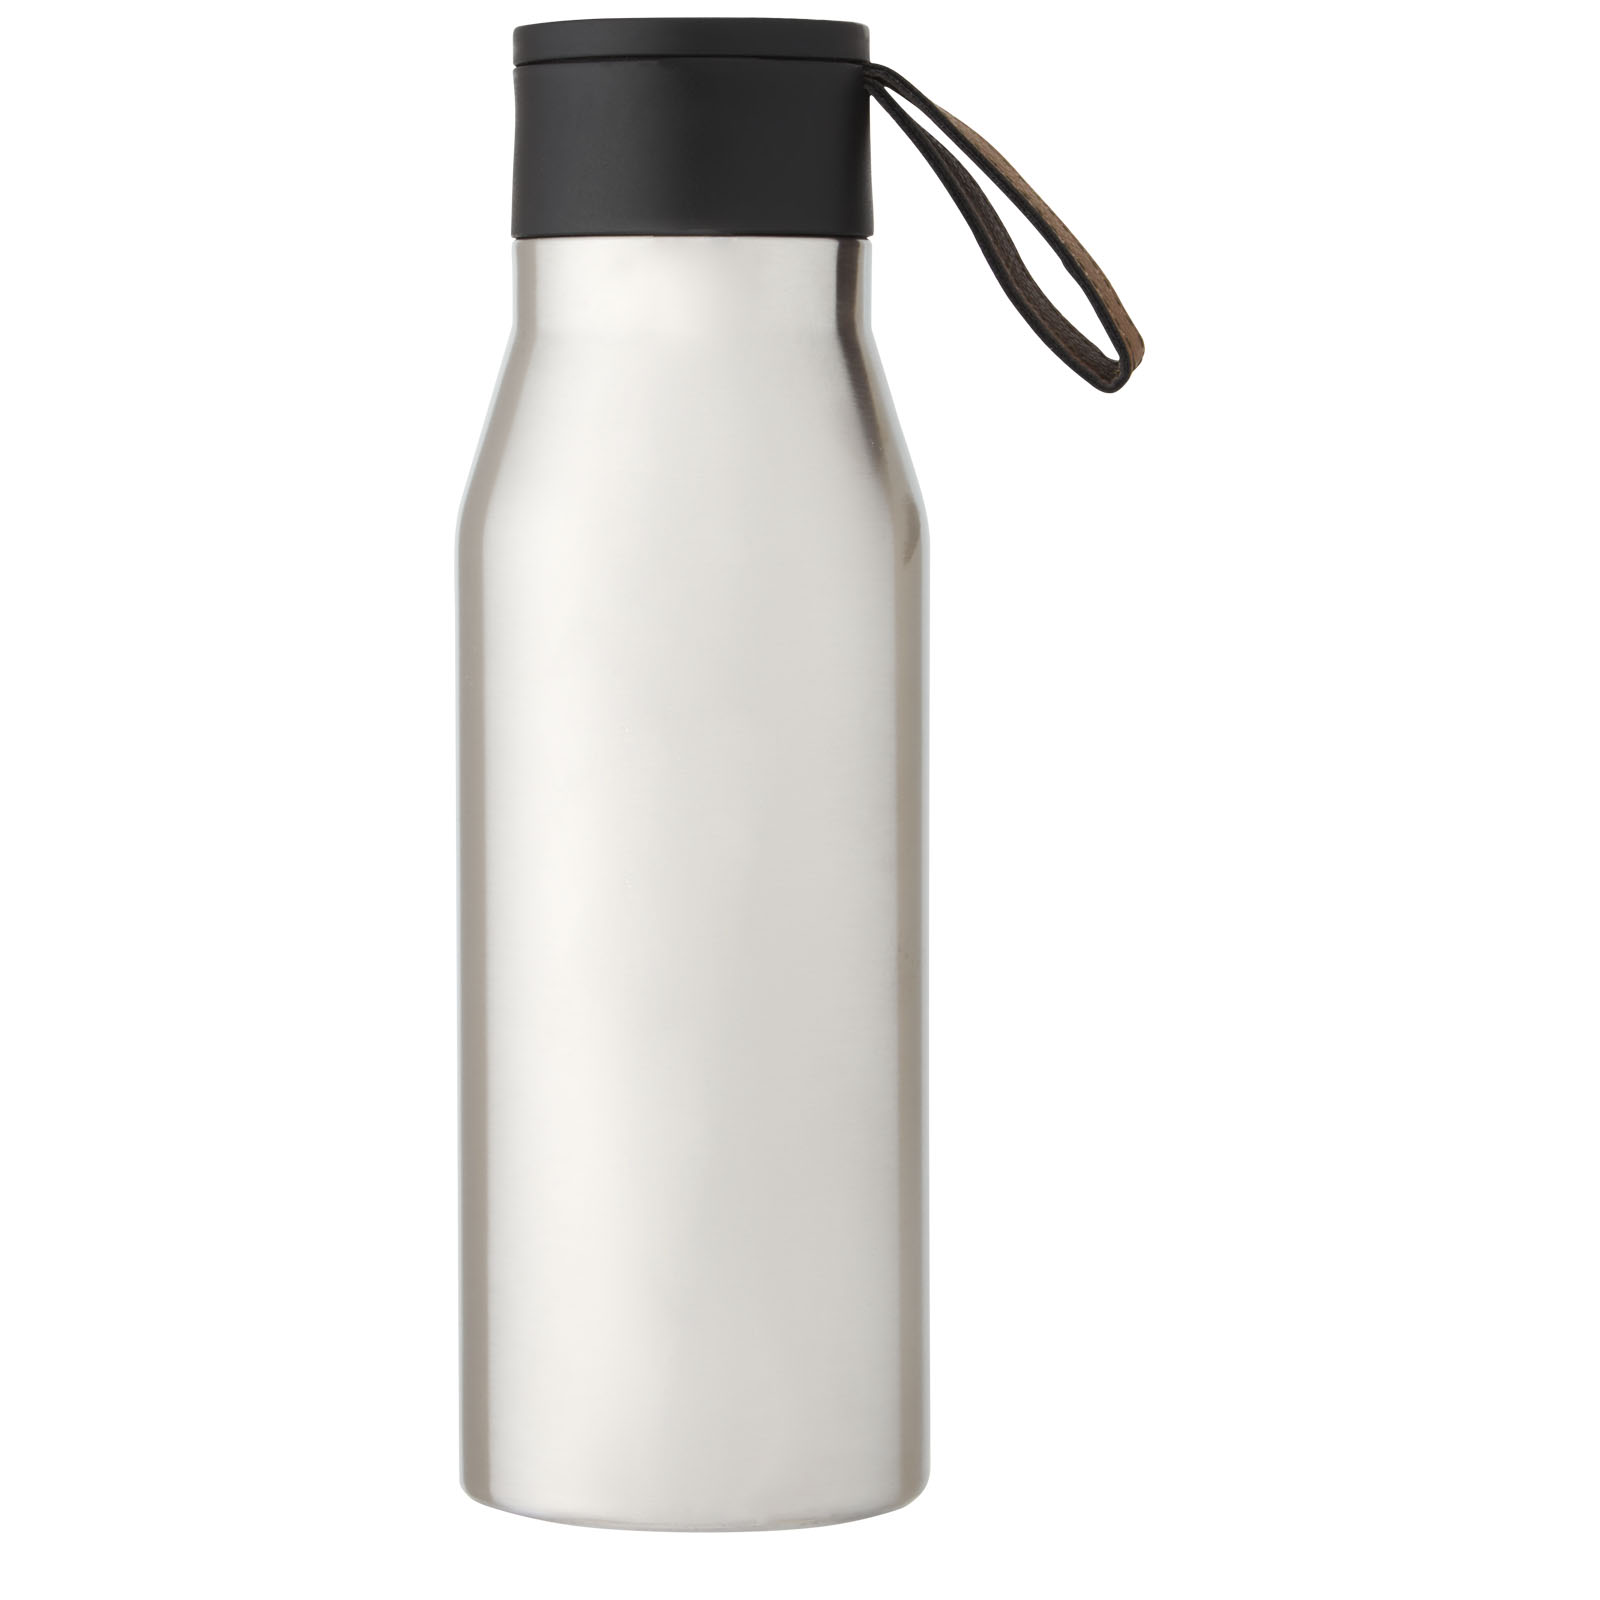 Advertising Insulated bottles - Ljungan 500 ml copper vacuum insulated stainless steel bottle with PU leather strap and lid - 2